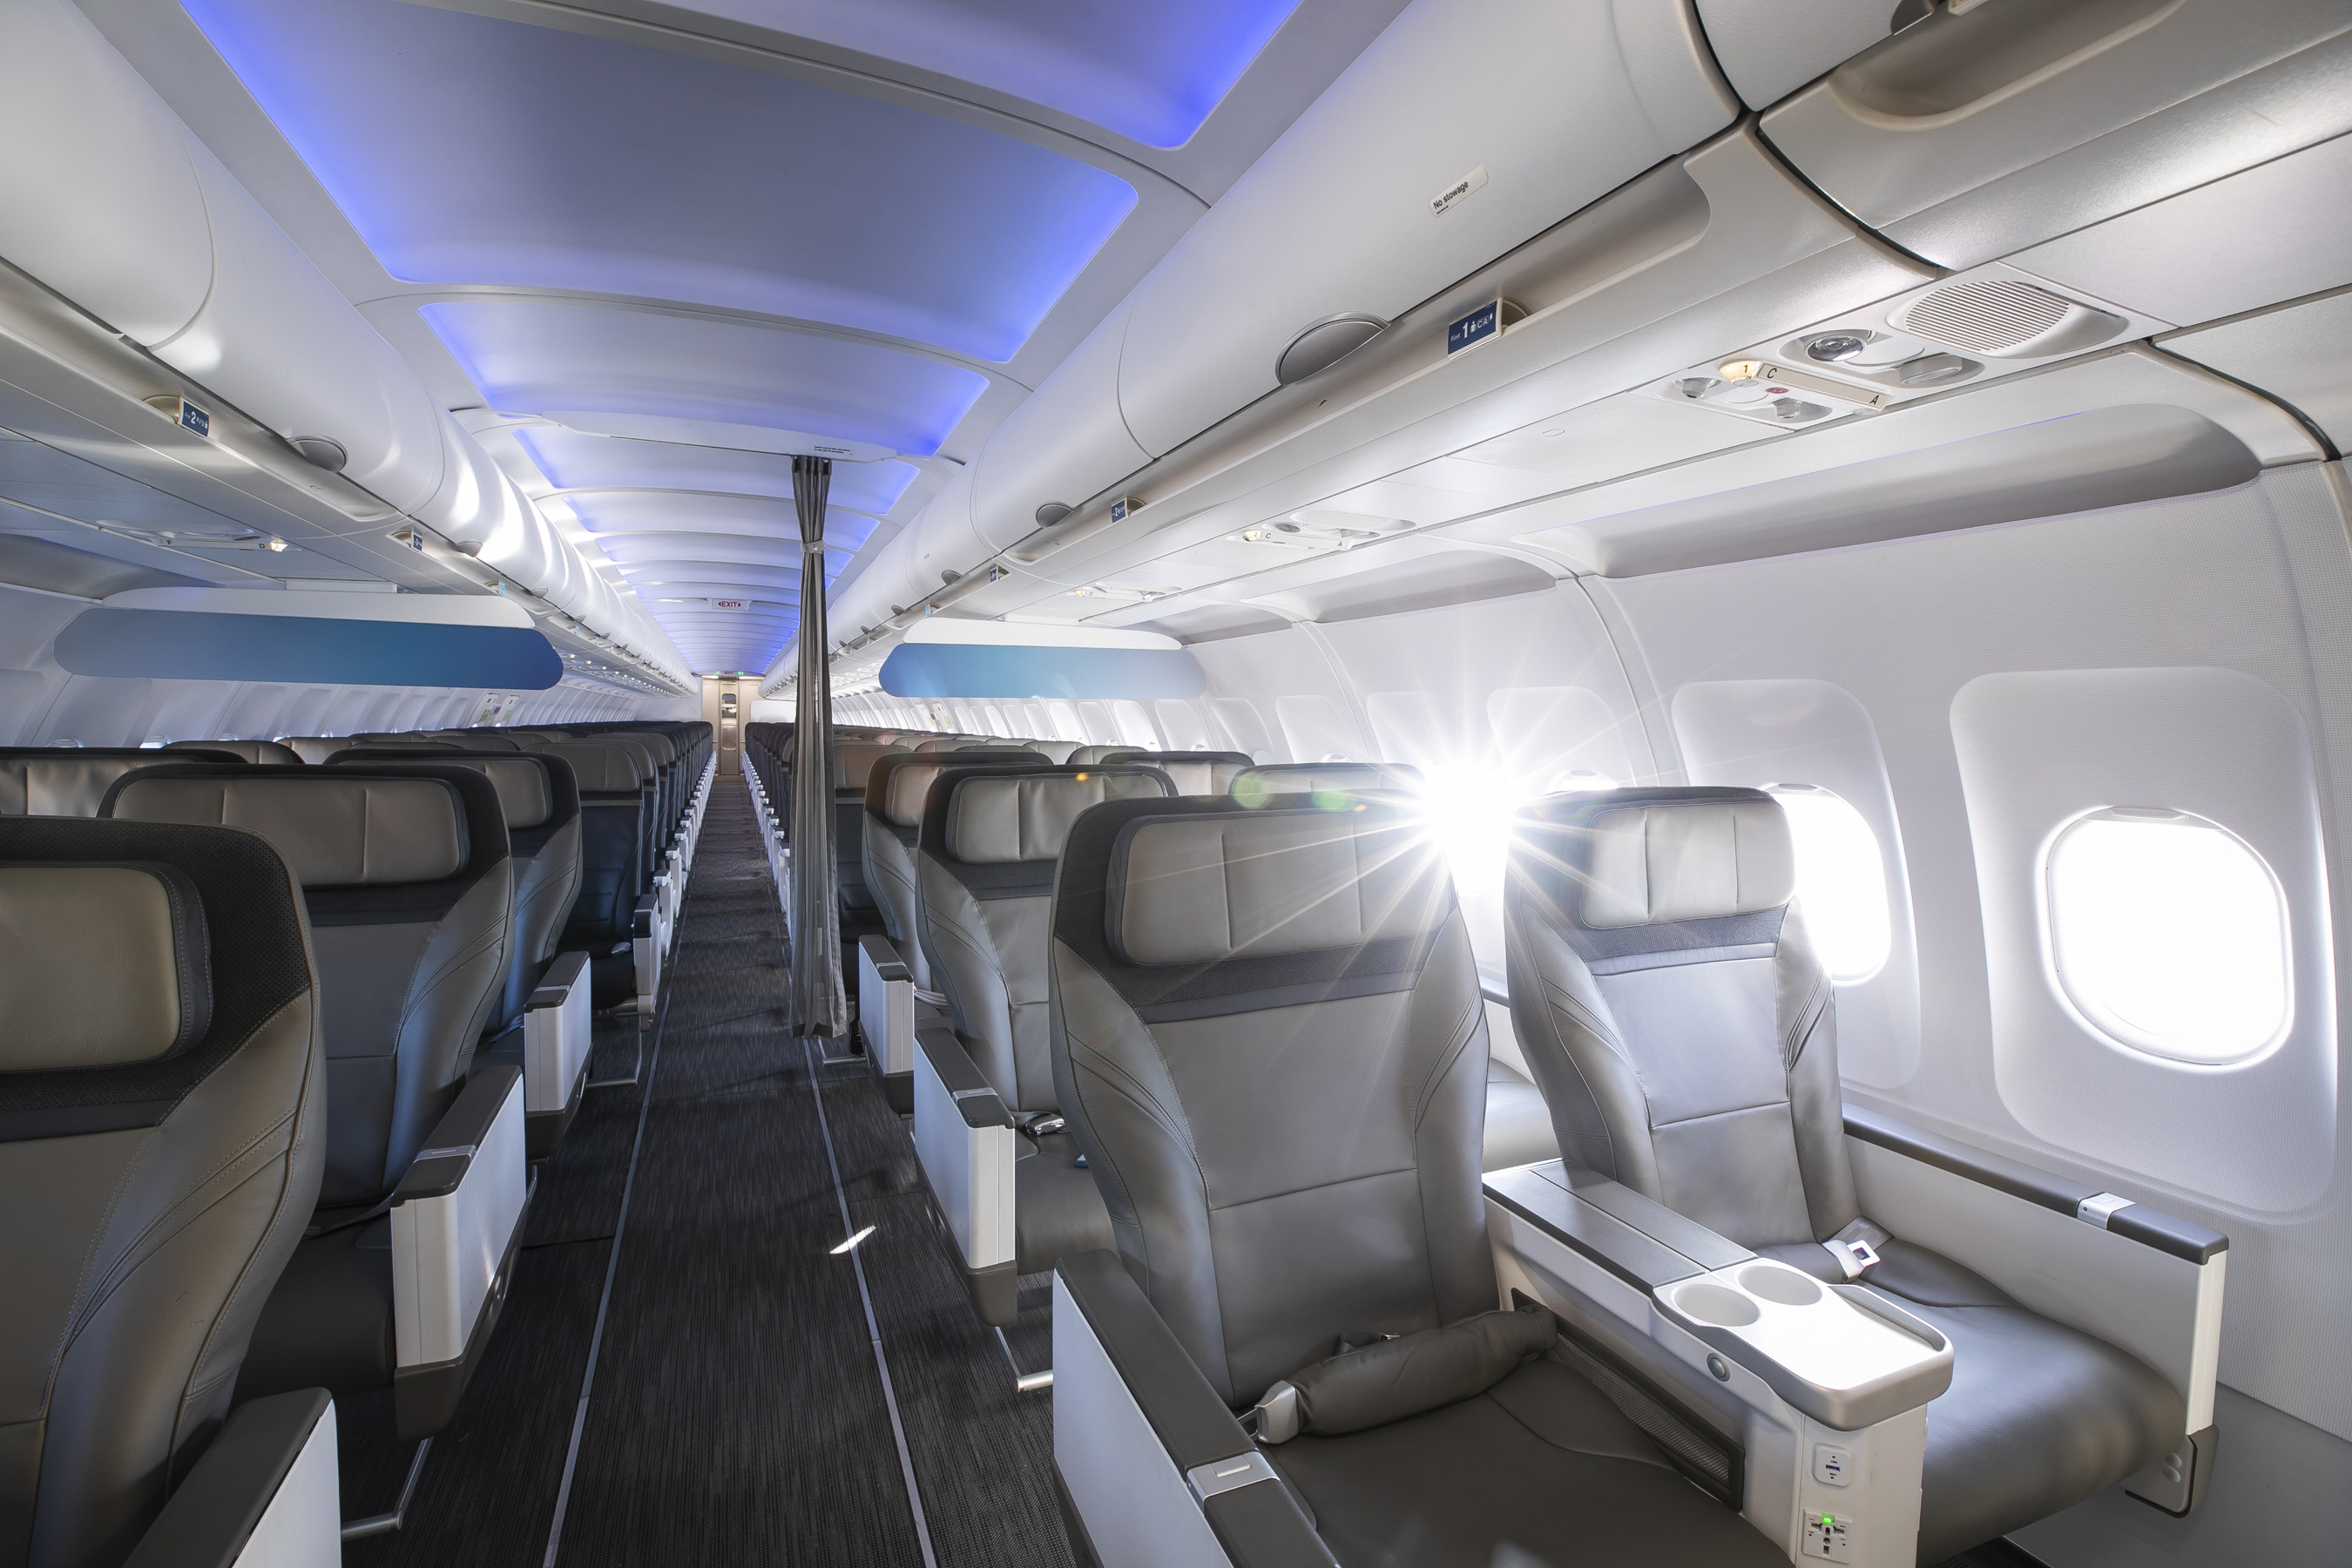 Now arriving: Alaska Airlines’ new cabin experience